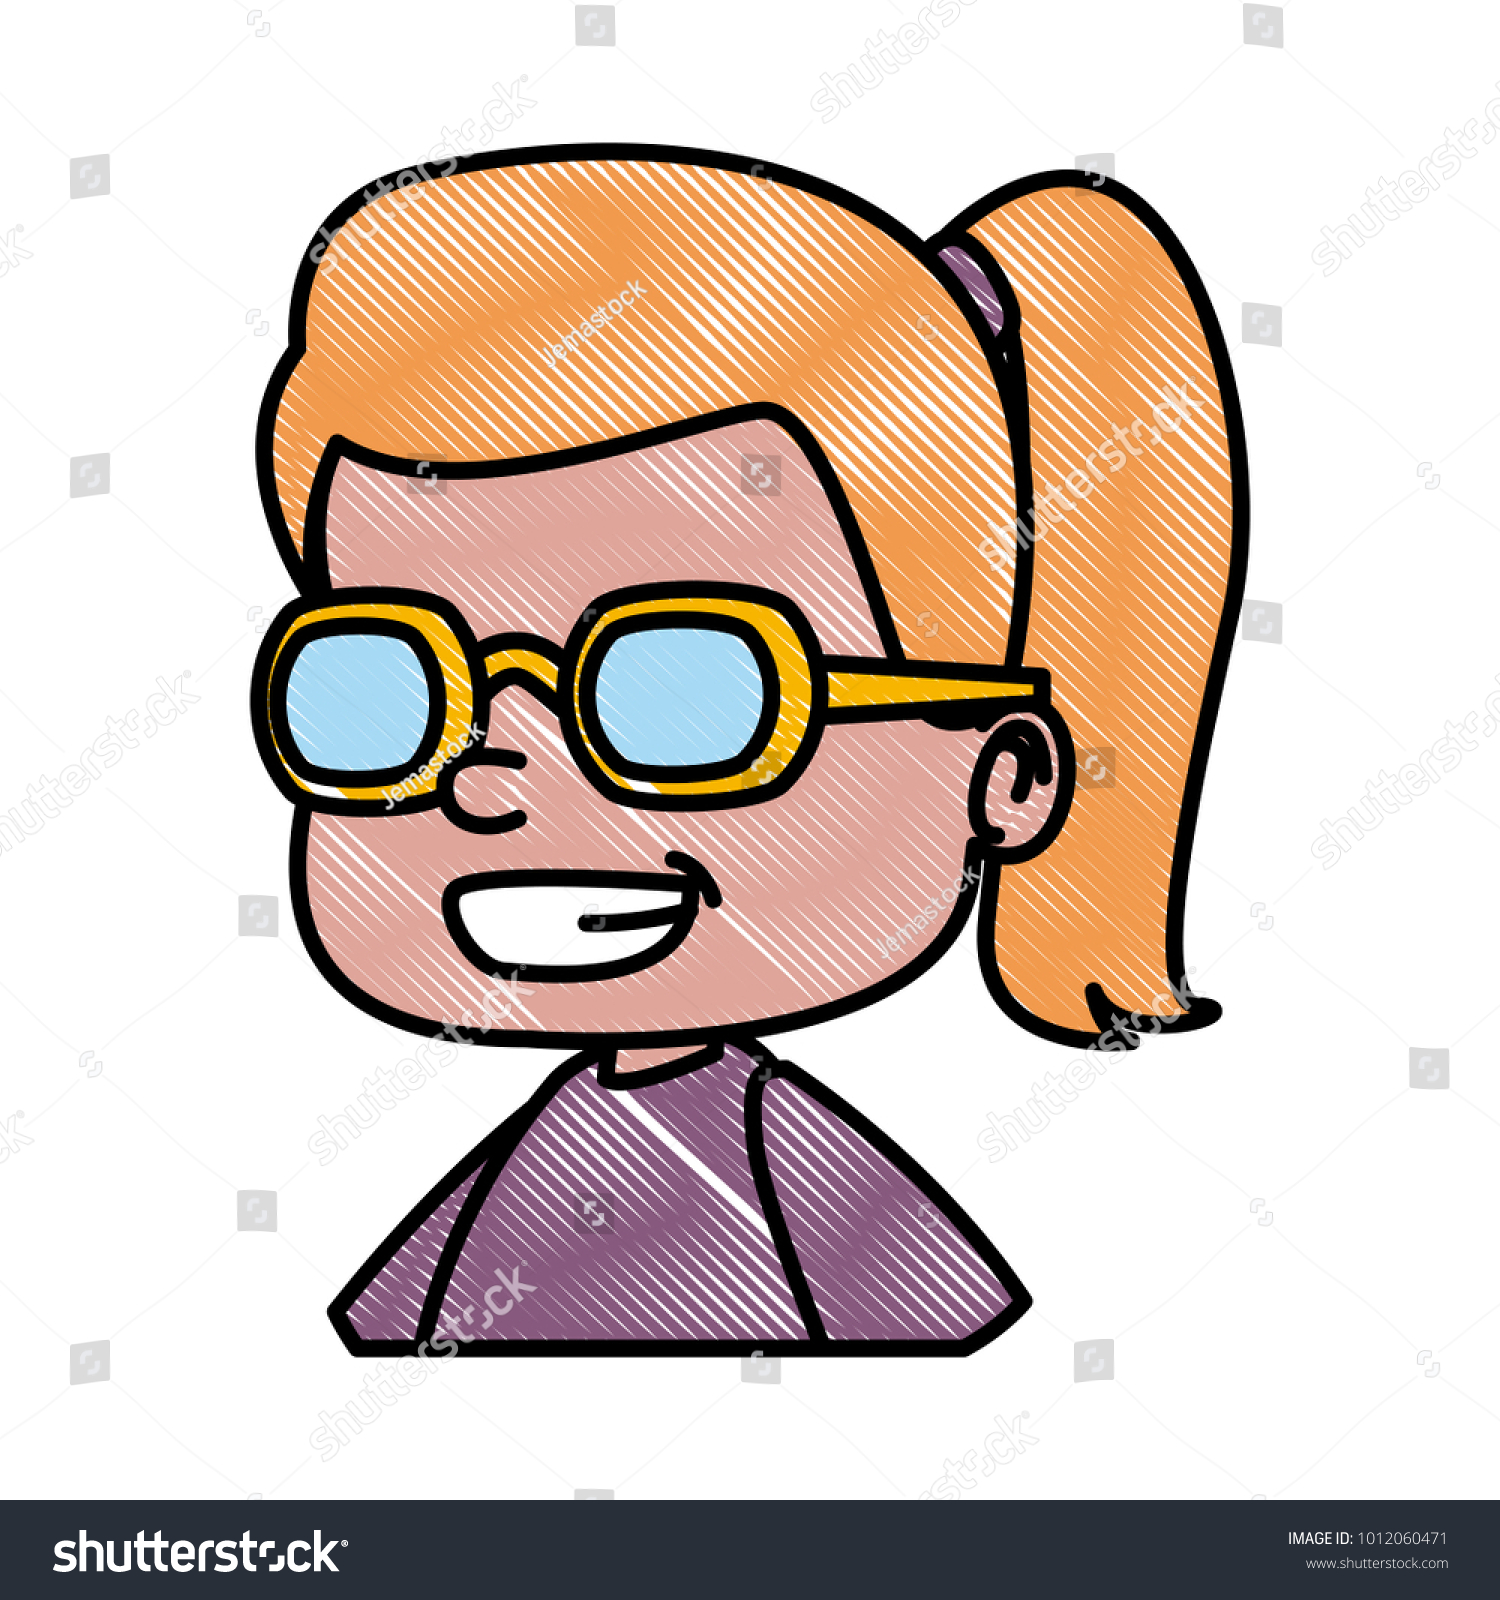 School Girl With Glasses Cartoon Royalty Free Stock Vector 1012060471